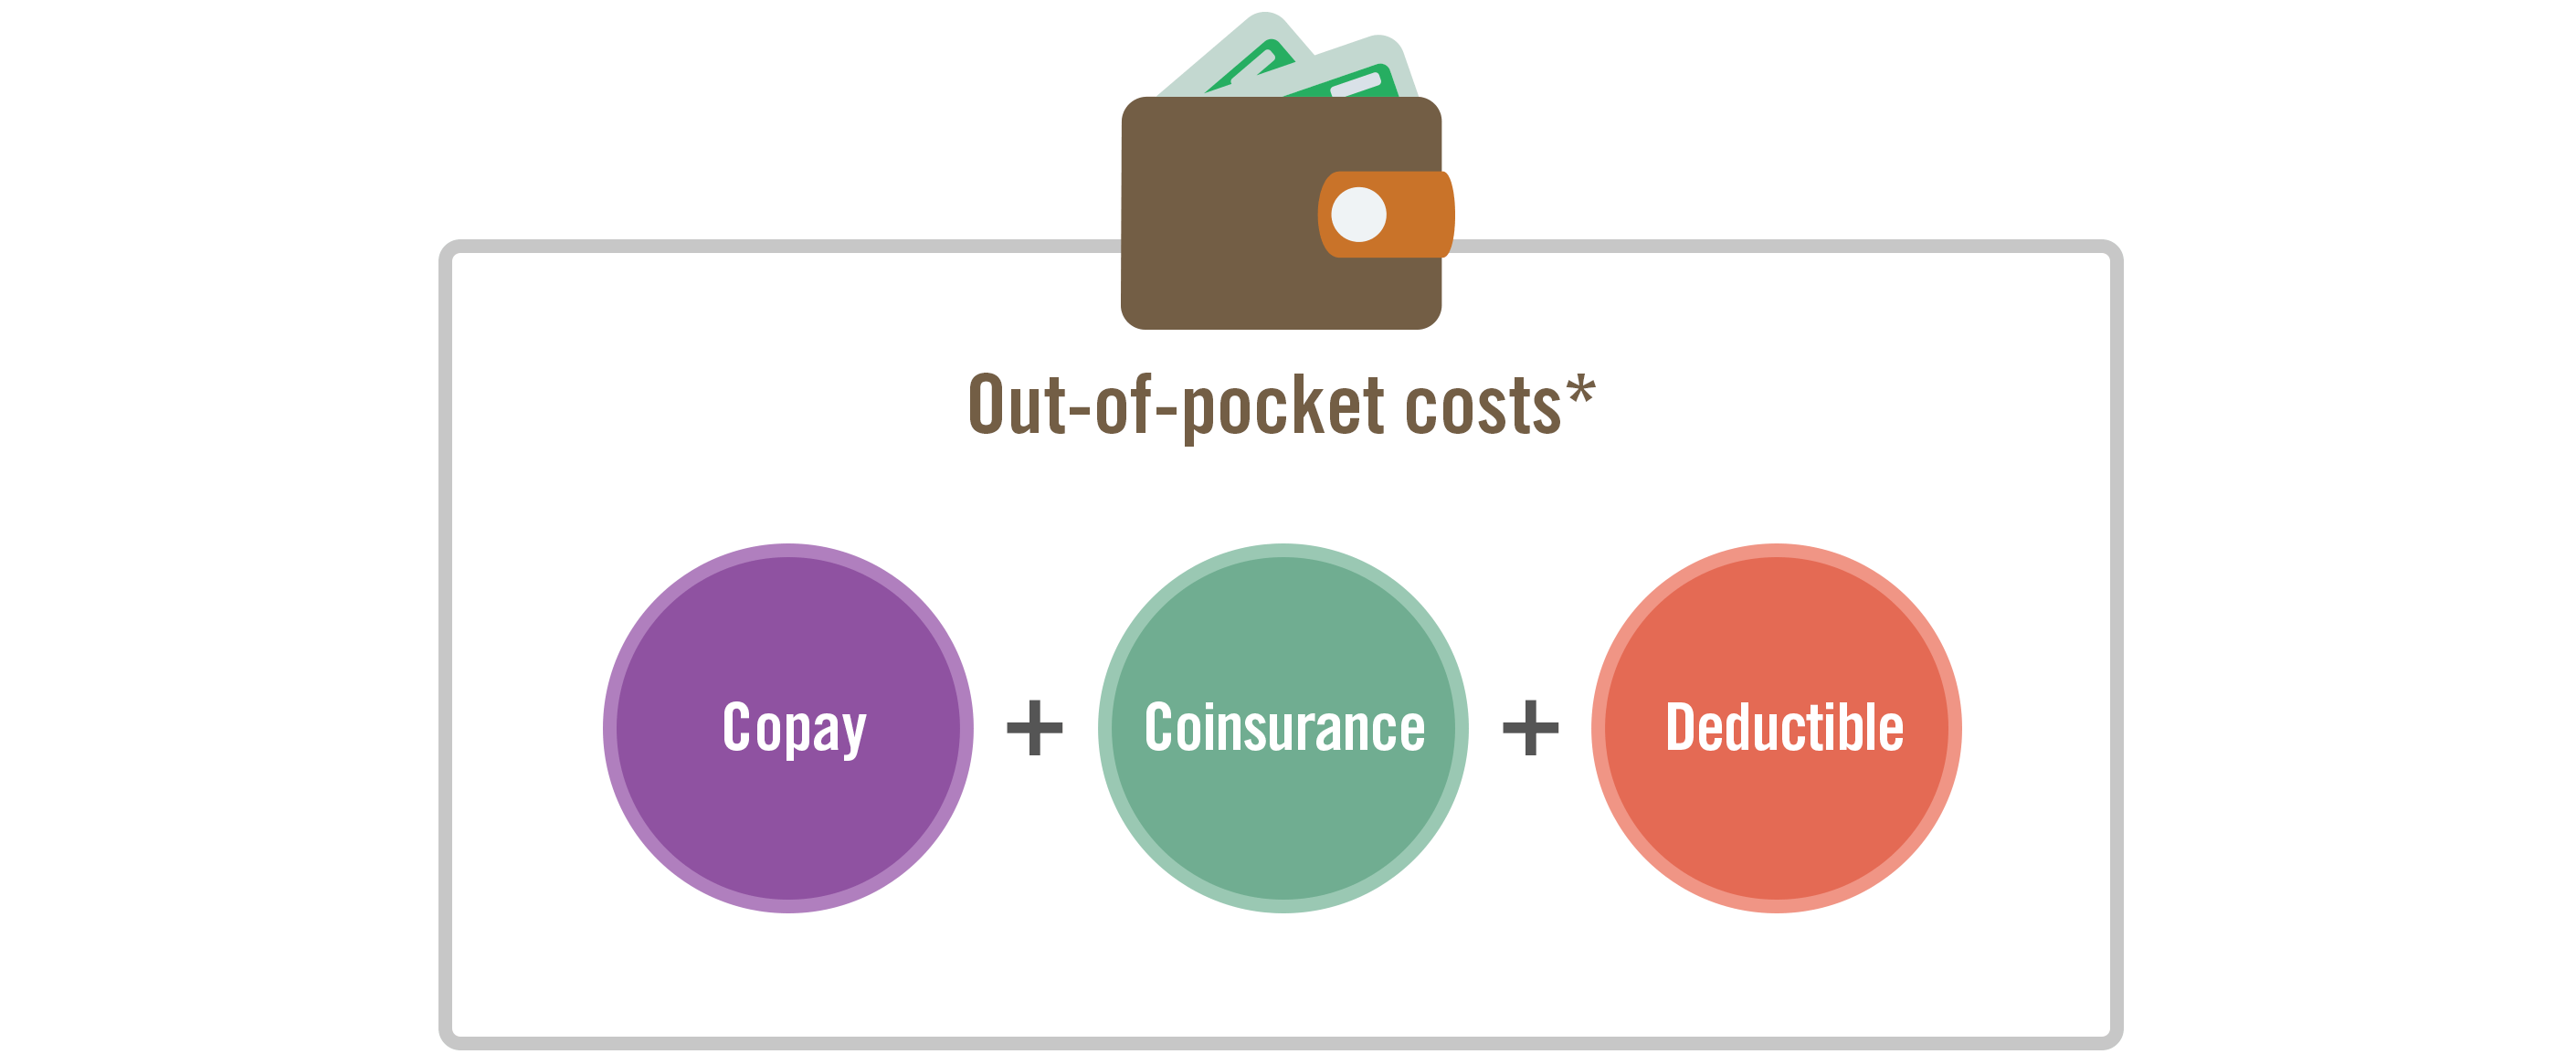 Copay Logo - Out-of-pocket costs | Wellmark